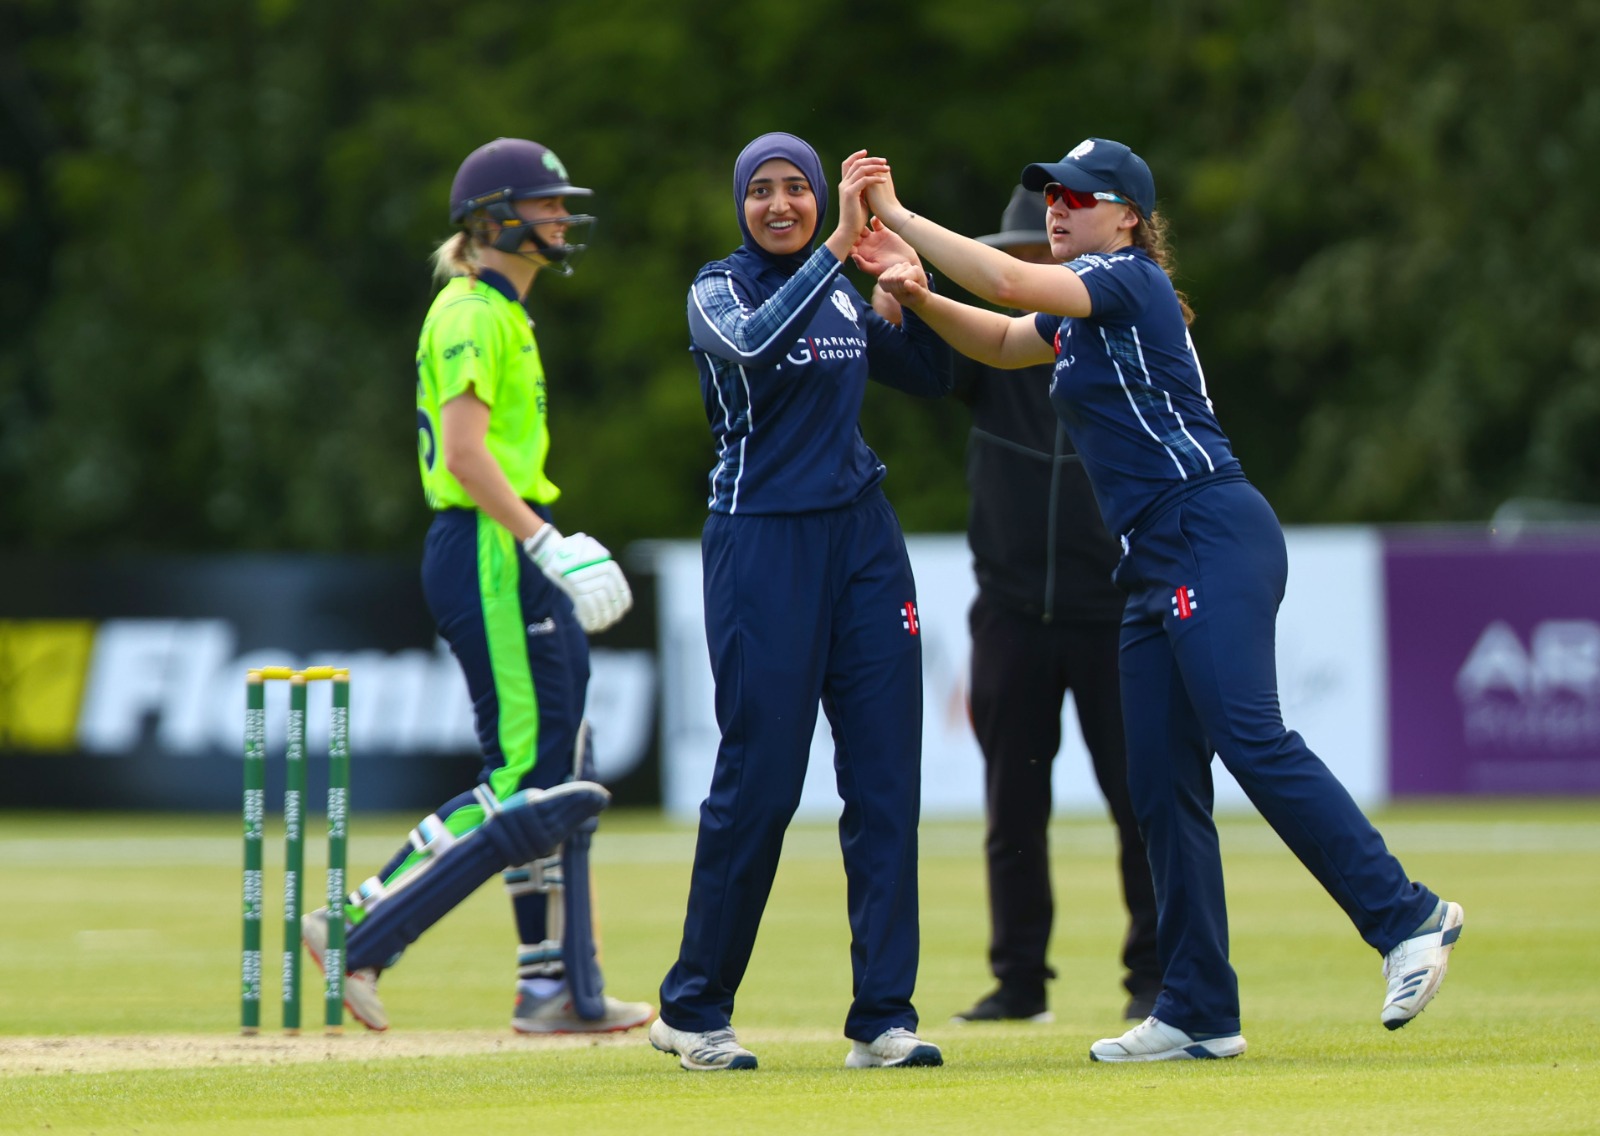 Wheal makes it four for Scotland as The Hundred gets underway